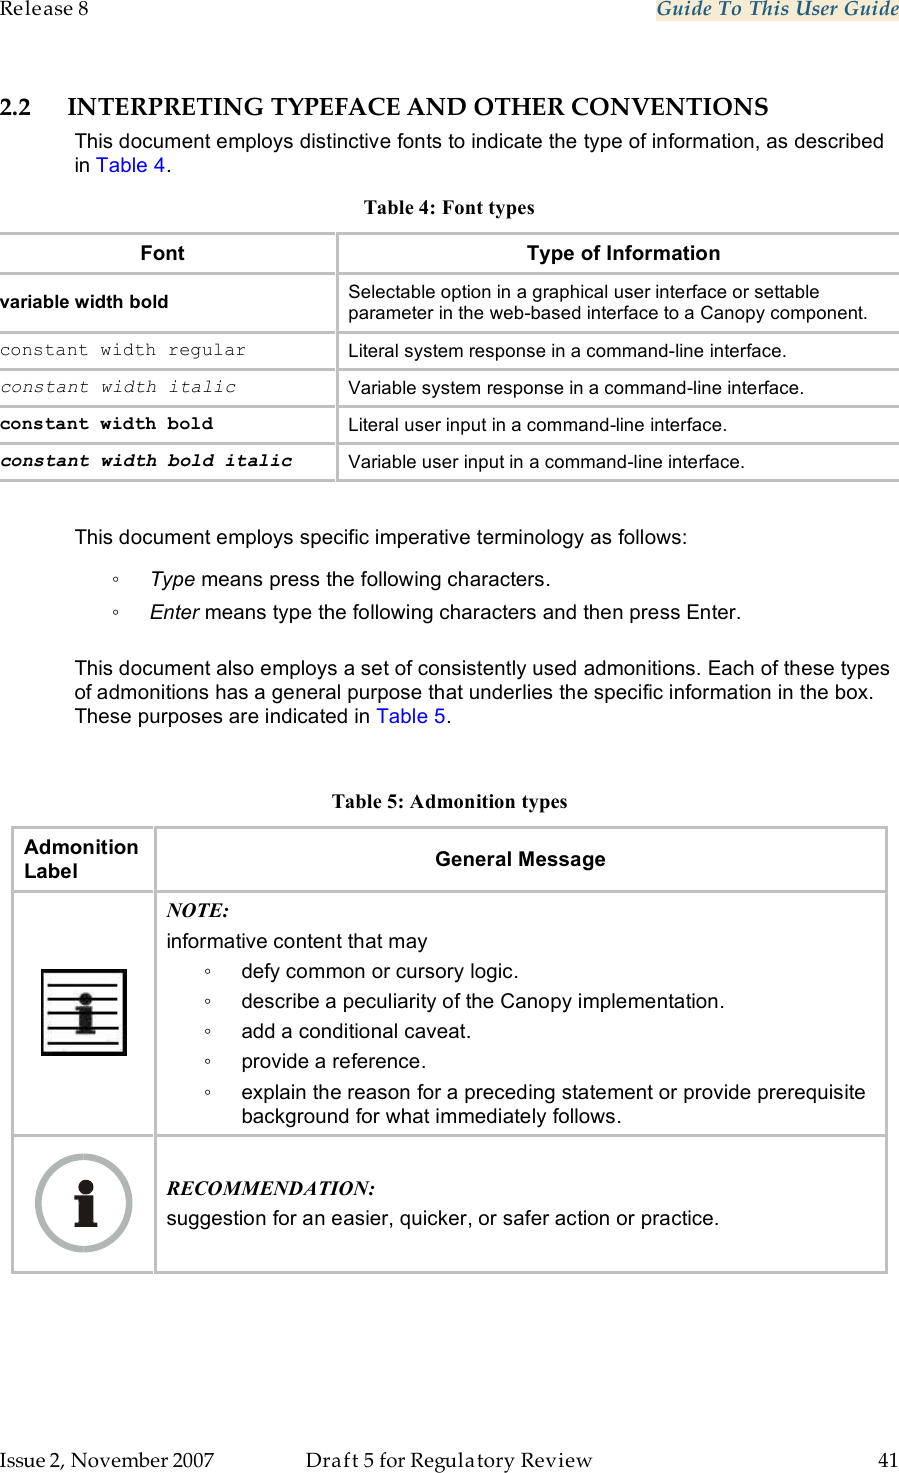 Release 8    Guide To This User Guide                  March 200                  Through Software Release 6.   Issue 2, November 2007  Draft 5 for Regulatory Review  41     2.2 INTERPRETING TYPEFACE AND OTHER CONVENTIONS This document employs distinctive fonts to indicate the type of information, as described in Table 4. Table 4: Font types Font Type of Information variable width bold Selectable option in a graphical user interface or settable parameter in the web-based interface to a Canopy component. constant width regular Literal system response in a command-line interface. constant width italic Variable system response in a command-line interface. constant width bold Literal user input in a command-line interface. constant width bold italic Variable user input in a command-line interface.  This document employs specific imperative terminology as follows: ◦ Type means press the following characters. ◦ Enter means type the following characters and then press Enter.  This document also employs a set of consistently used admonitions. Each of these types of admonitions has a general purpose that underlies the specific information in the box. These purposes are indicated in Table 5.  Table 5: Admonition types Admonition Label General Message  NOTE: informative content that may ◦  defy common or cursory logic. ◦  describe a peculiarity of the Canopy implementation. ◦  add a conditional caveat. ◦  provide a reference. ◦  explain the reason for a preceding statement or provide prerequisite background for what immediately follows.  RECOMMENDATION: suggestion for an easier, quicker, or safer action or practice. 